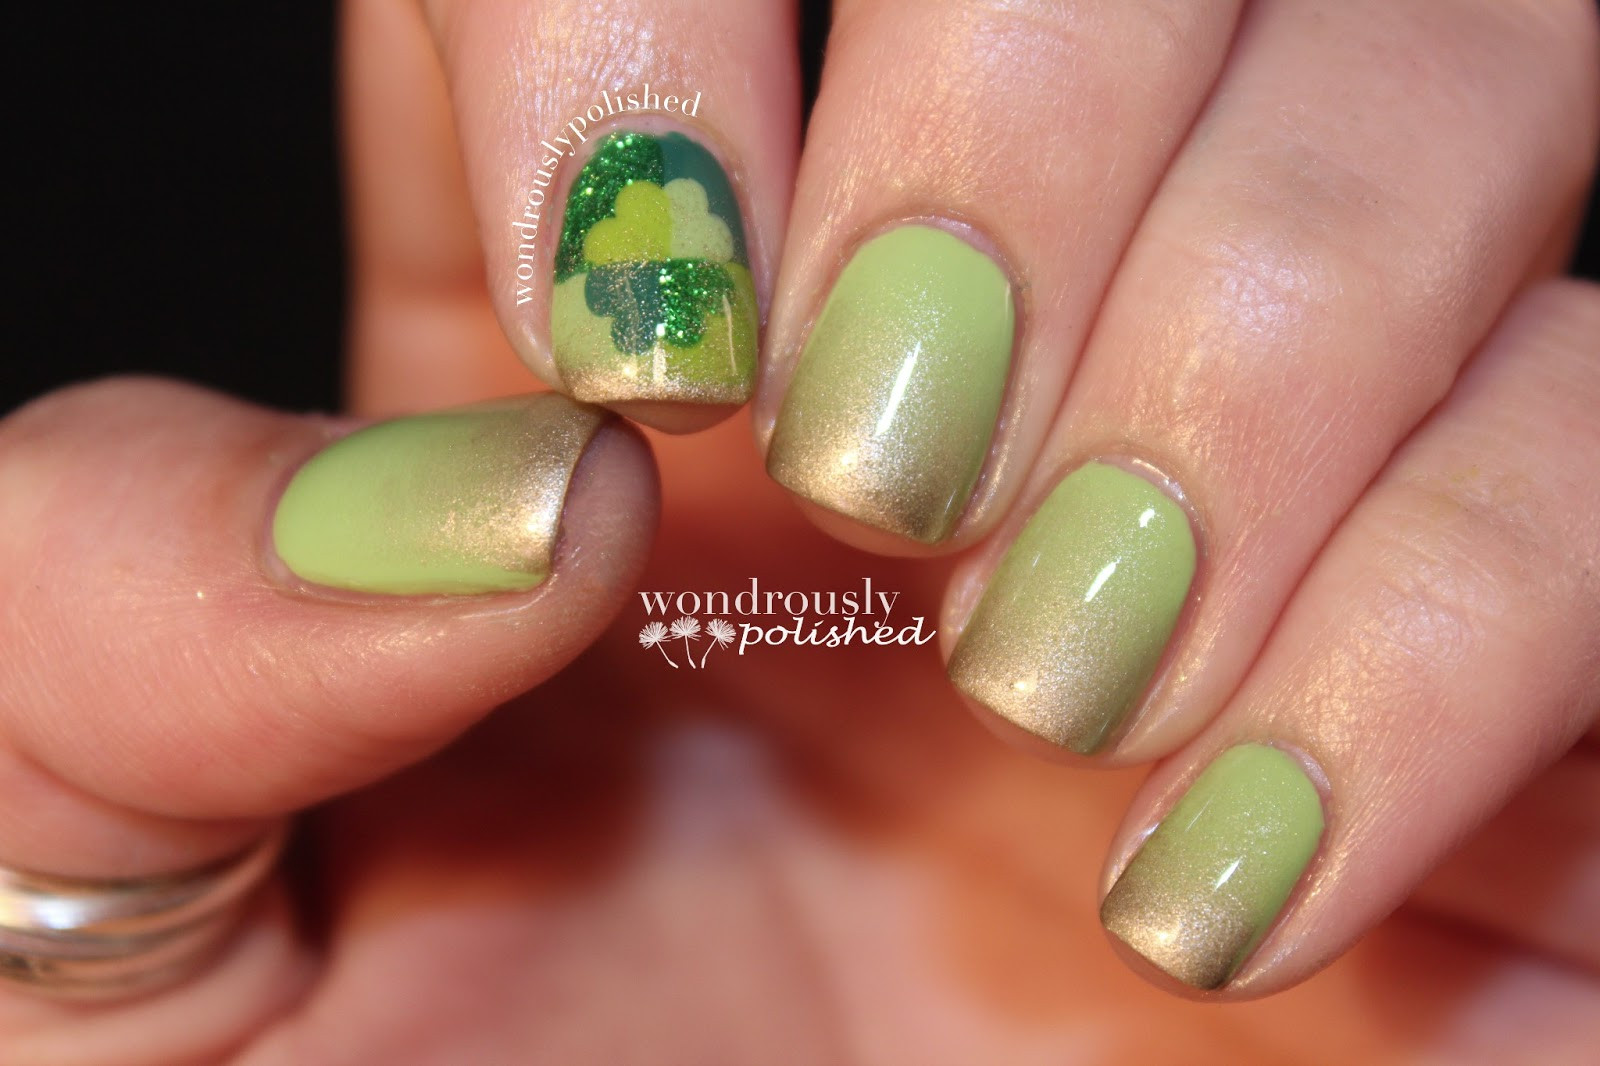 March Nail Designs
 Wondrously Polished March Nail Art Challenge Day 4 & 5